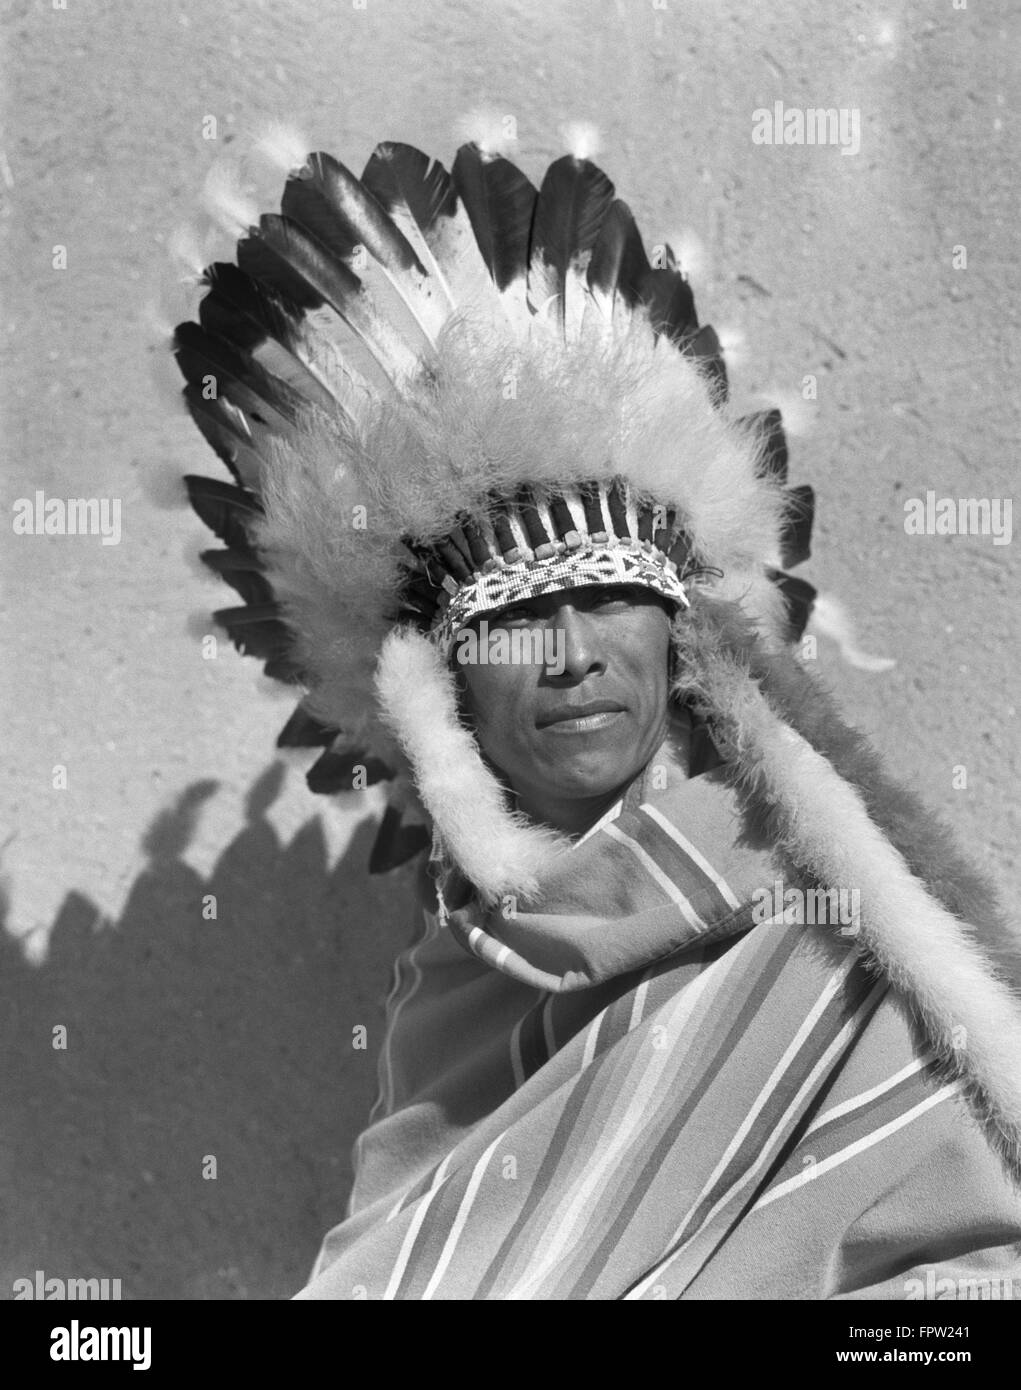 1930s PORTRAIT NATIVE AMERICAN INDIAN MAN WEARING FULL FEATHERED ...